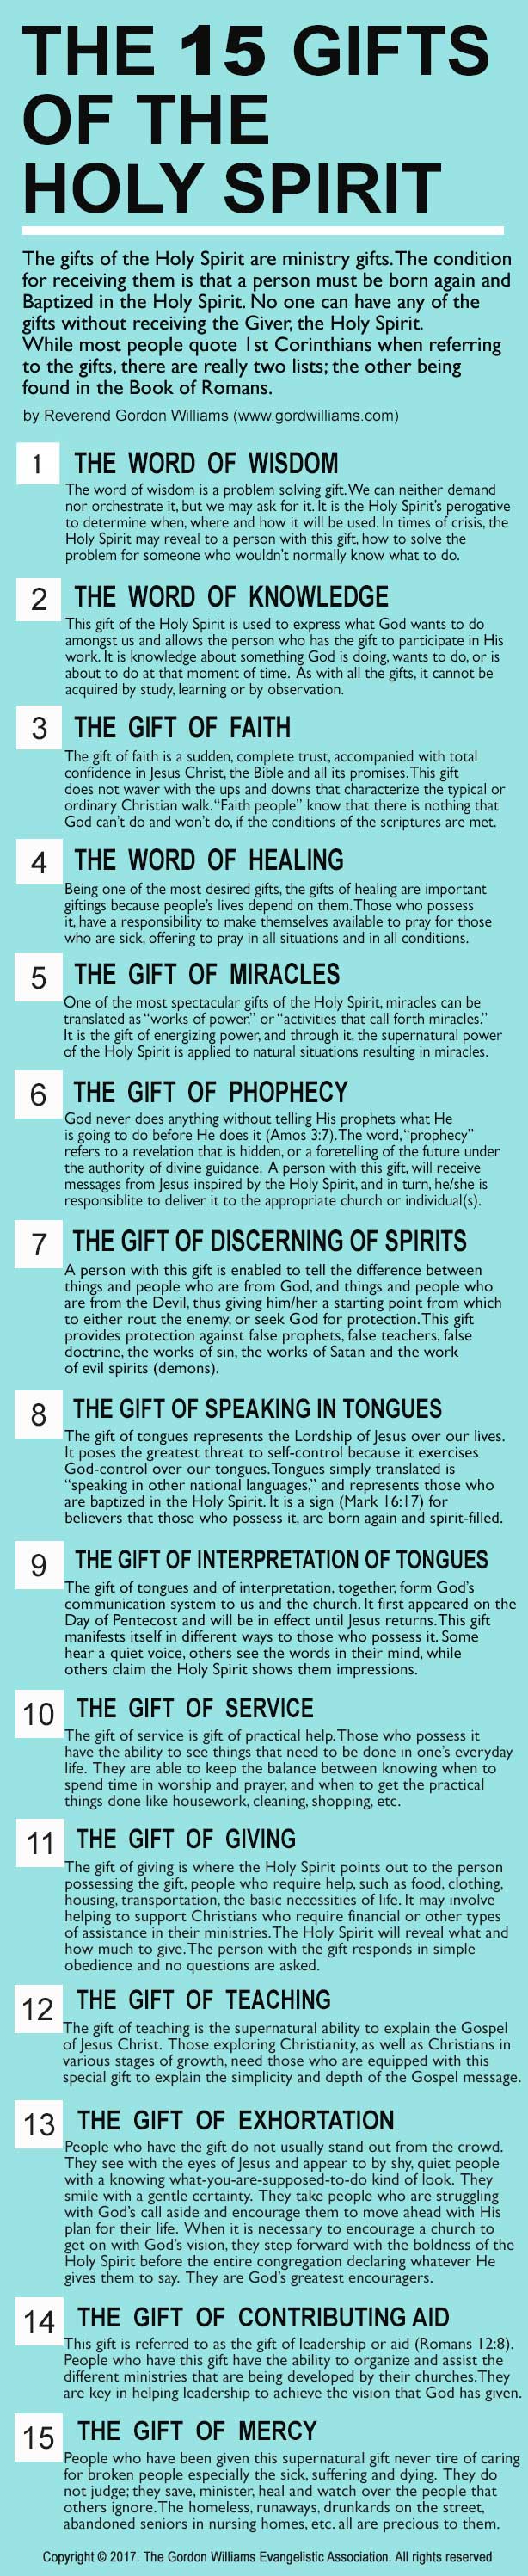 15 Gifts of the Holy Spirit - gordwilliams.com